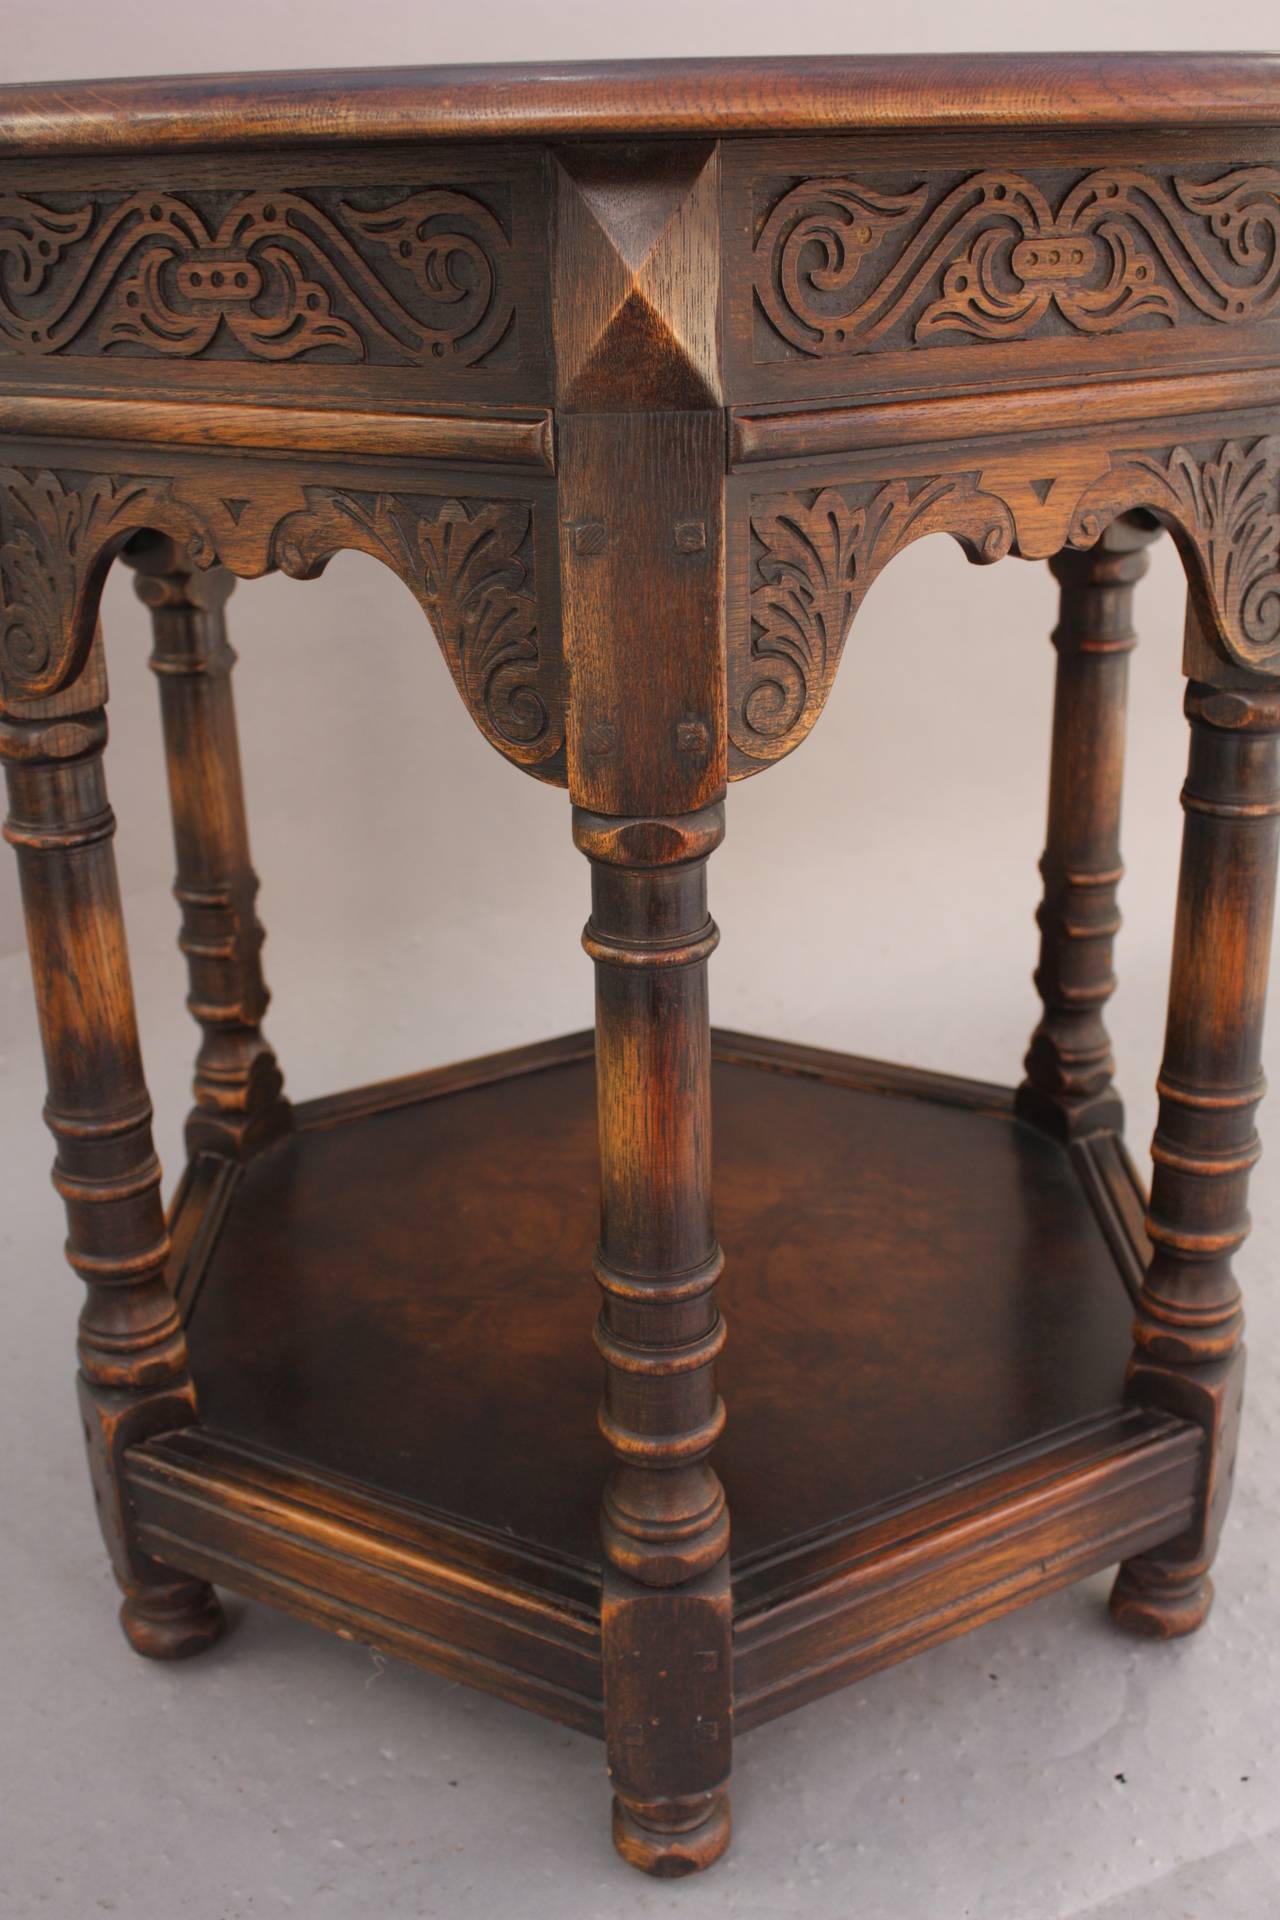 Circa 1920's carved walnut table with lower shelf. 29.5